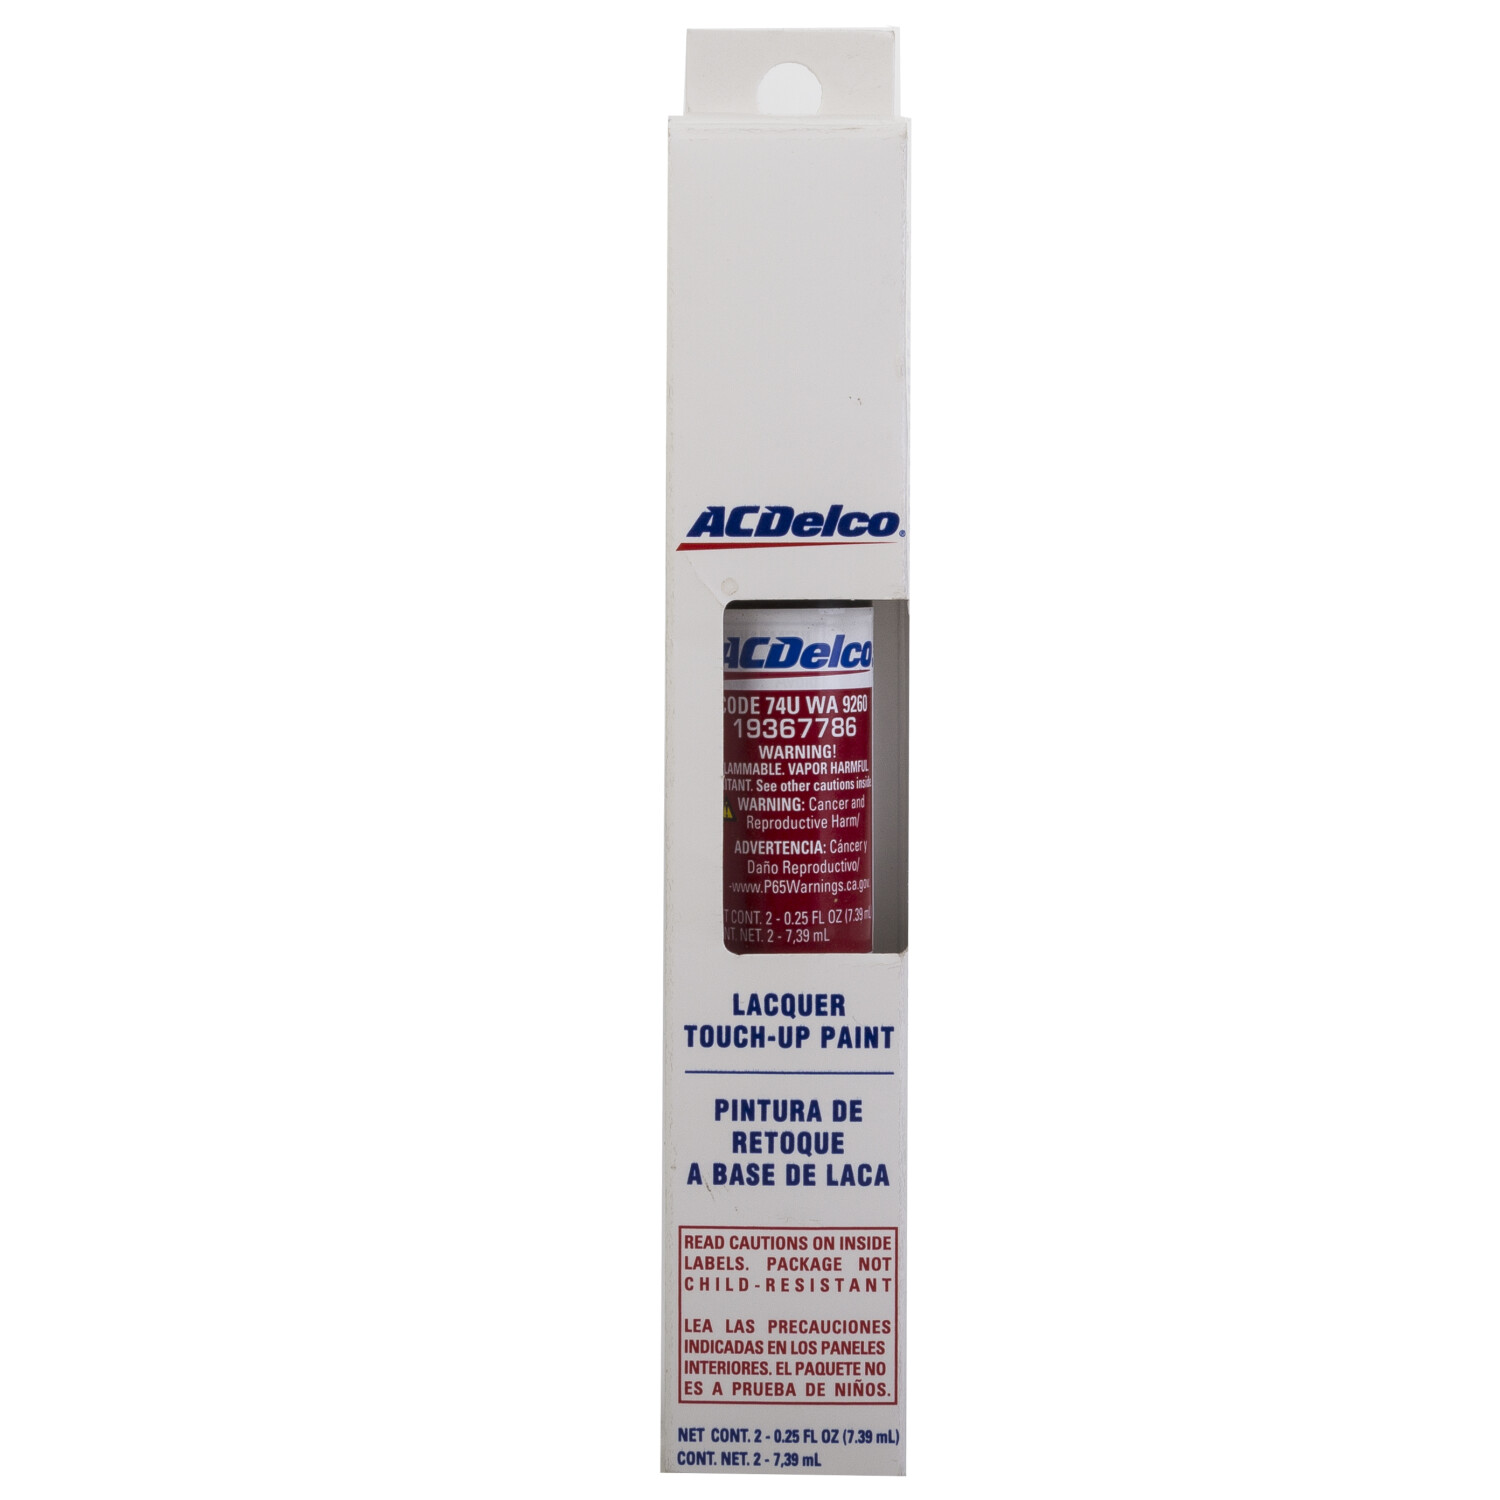 ACDelco Car Touch Up Paints in Automotive Paints and Coatings - Walmart.com